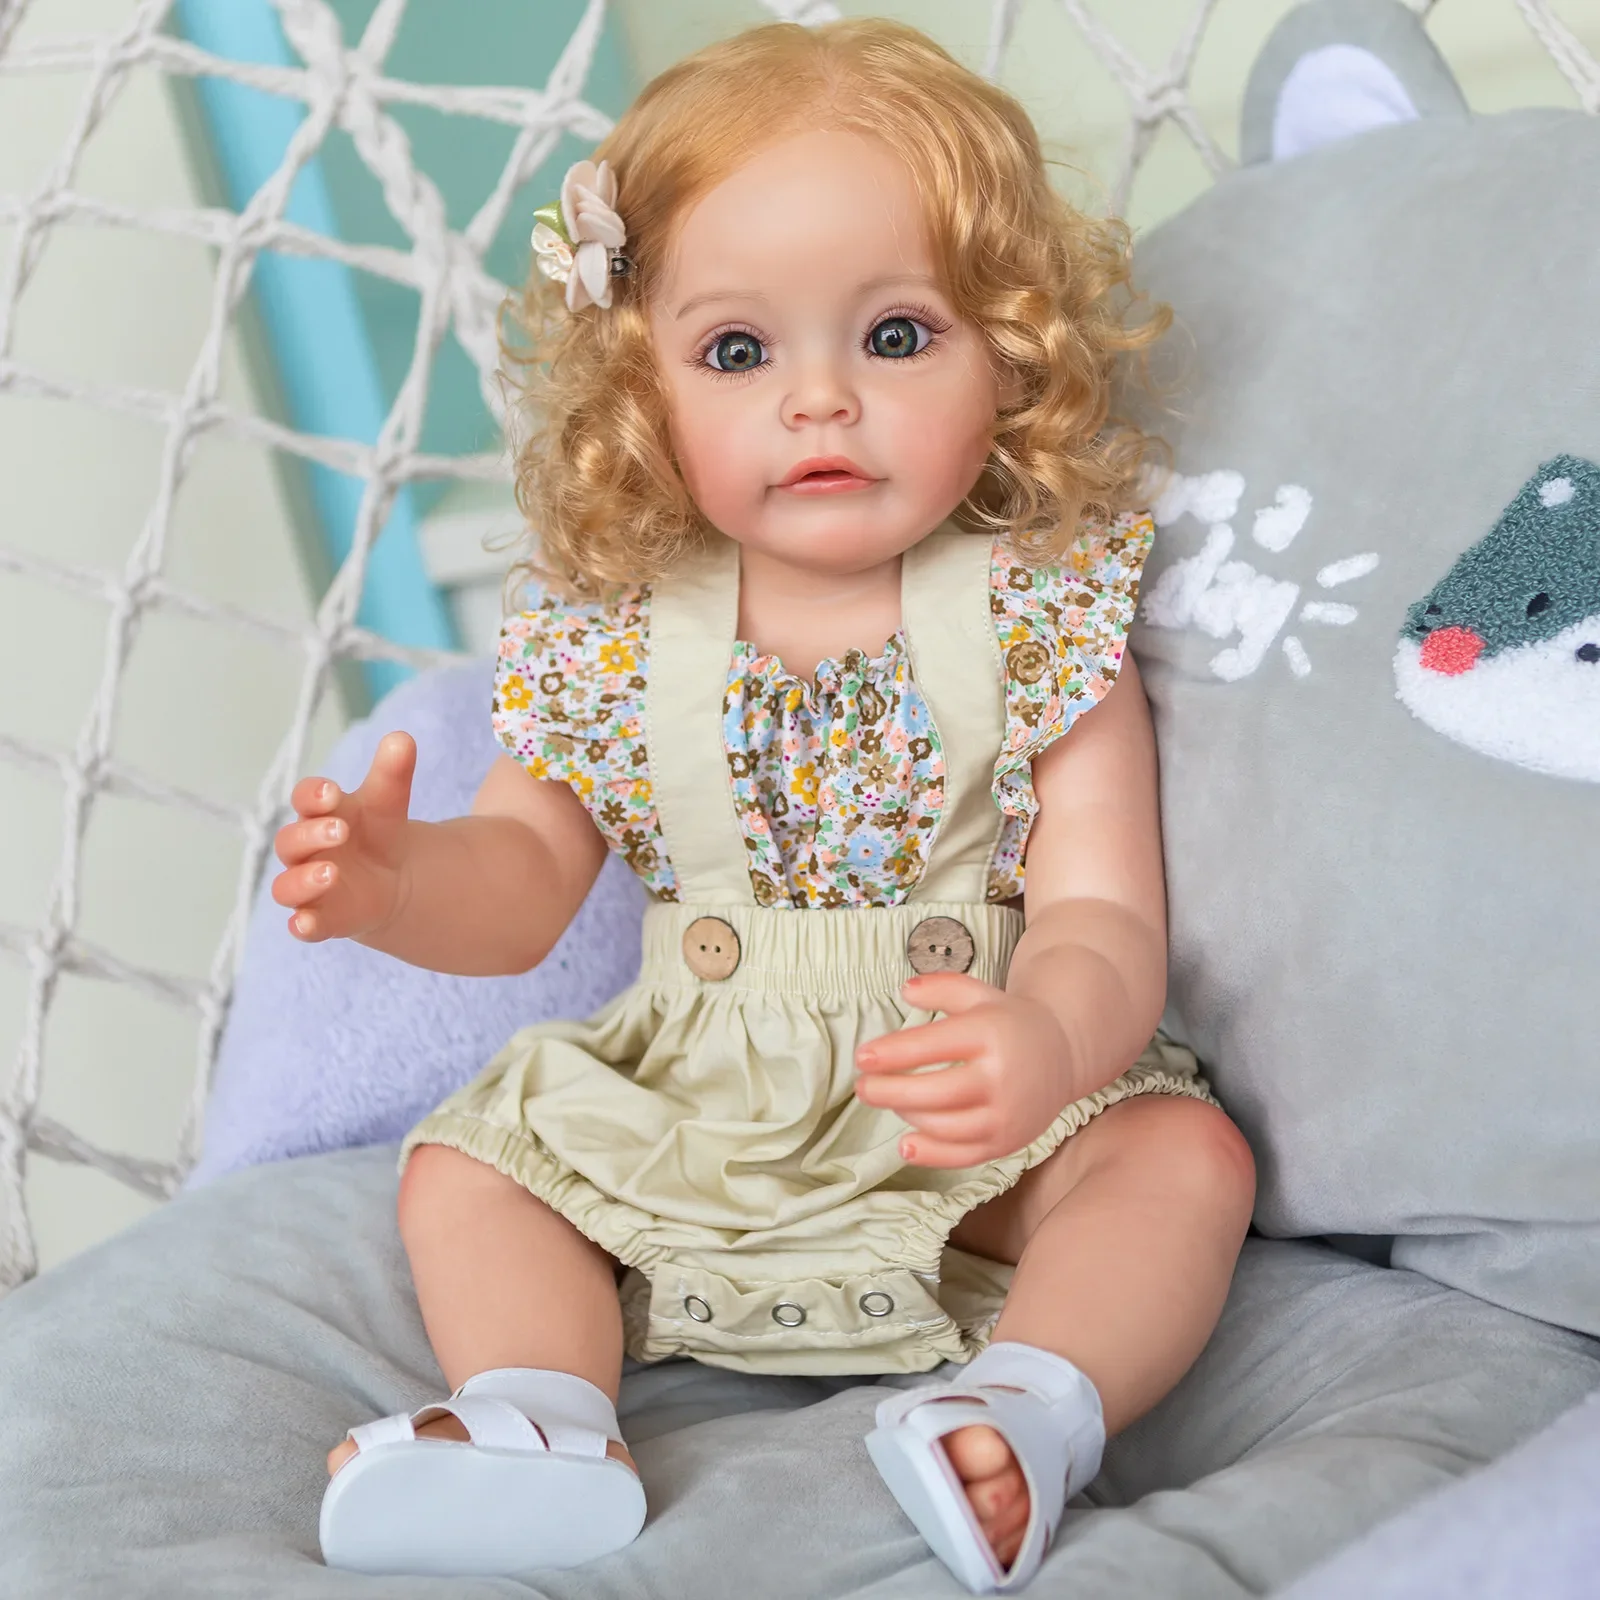 

55cm Full Body Silicone Simulation Baby Reborn Doll Hand Painted with Visible Veins Soft Siliconen Reborn Doll Girl Toys